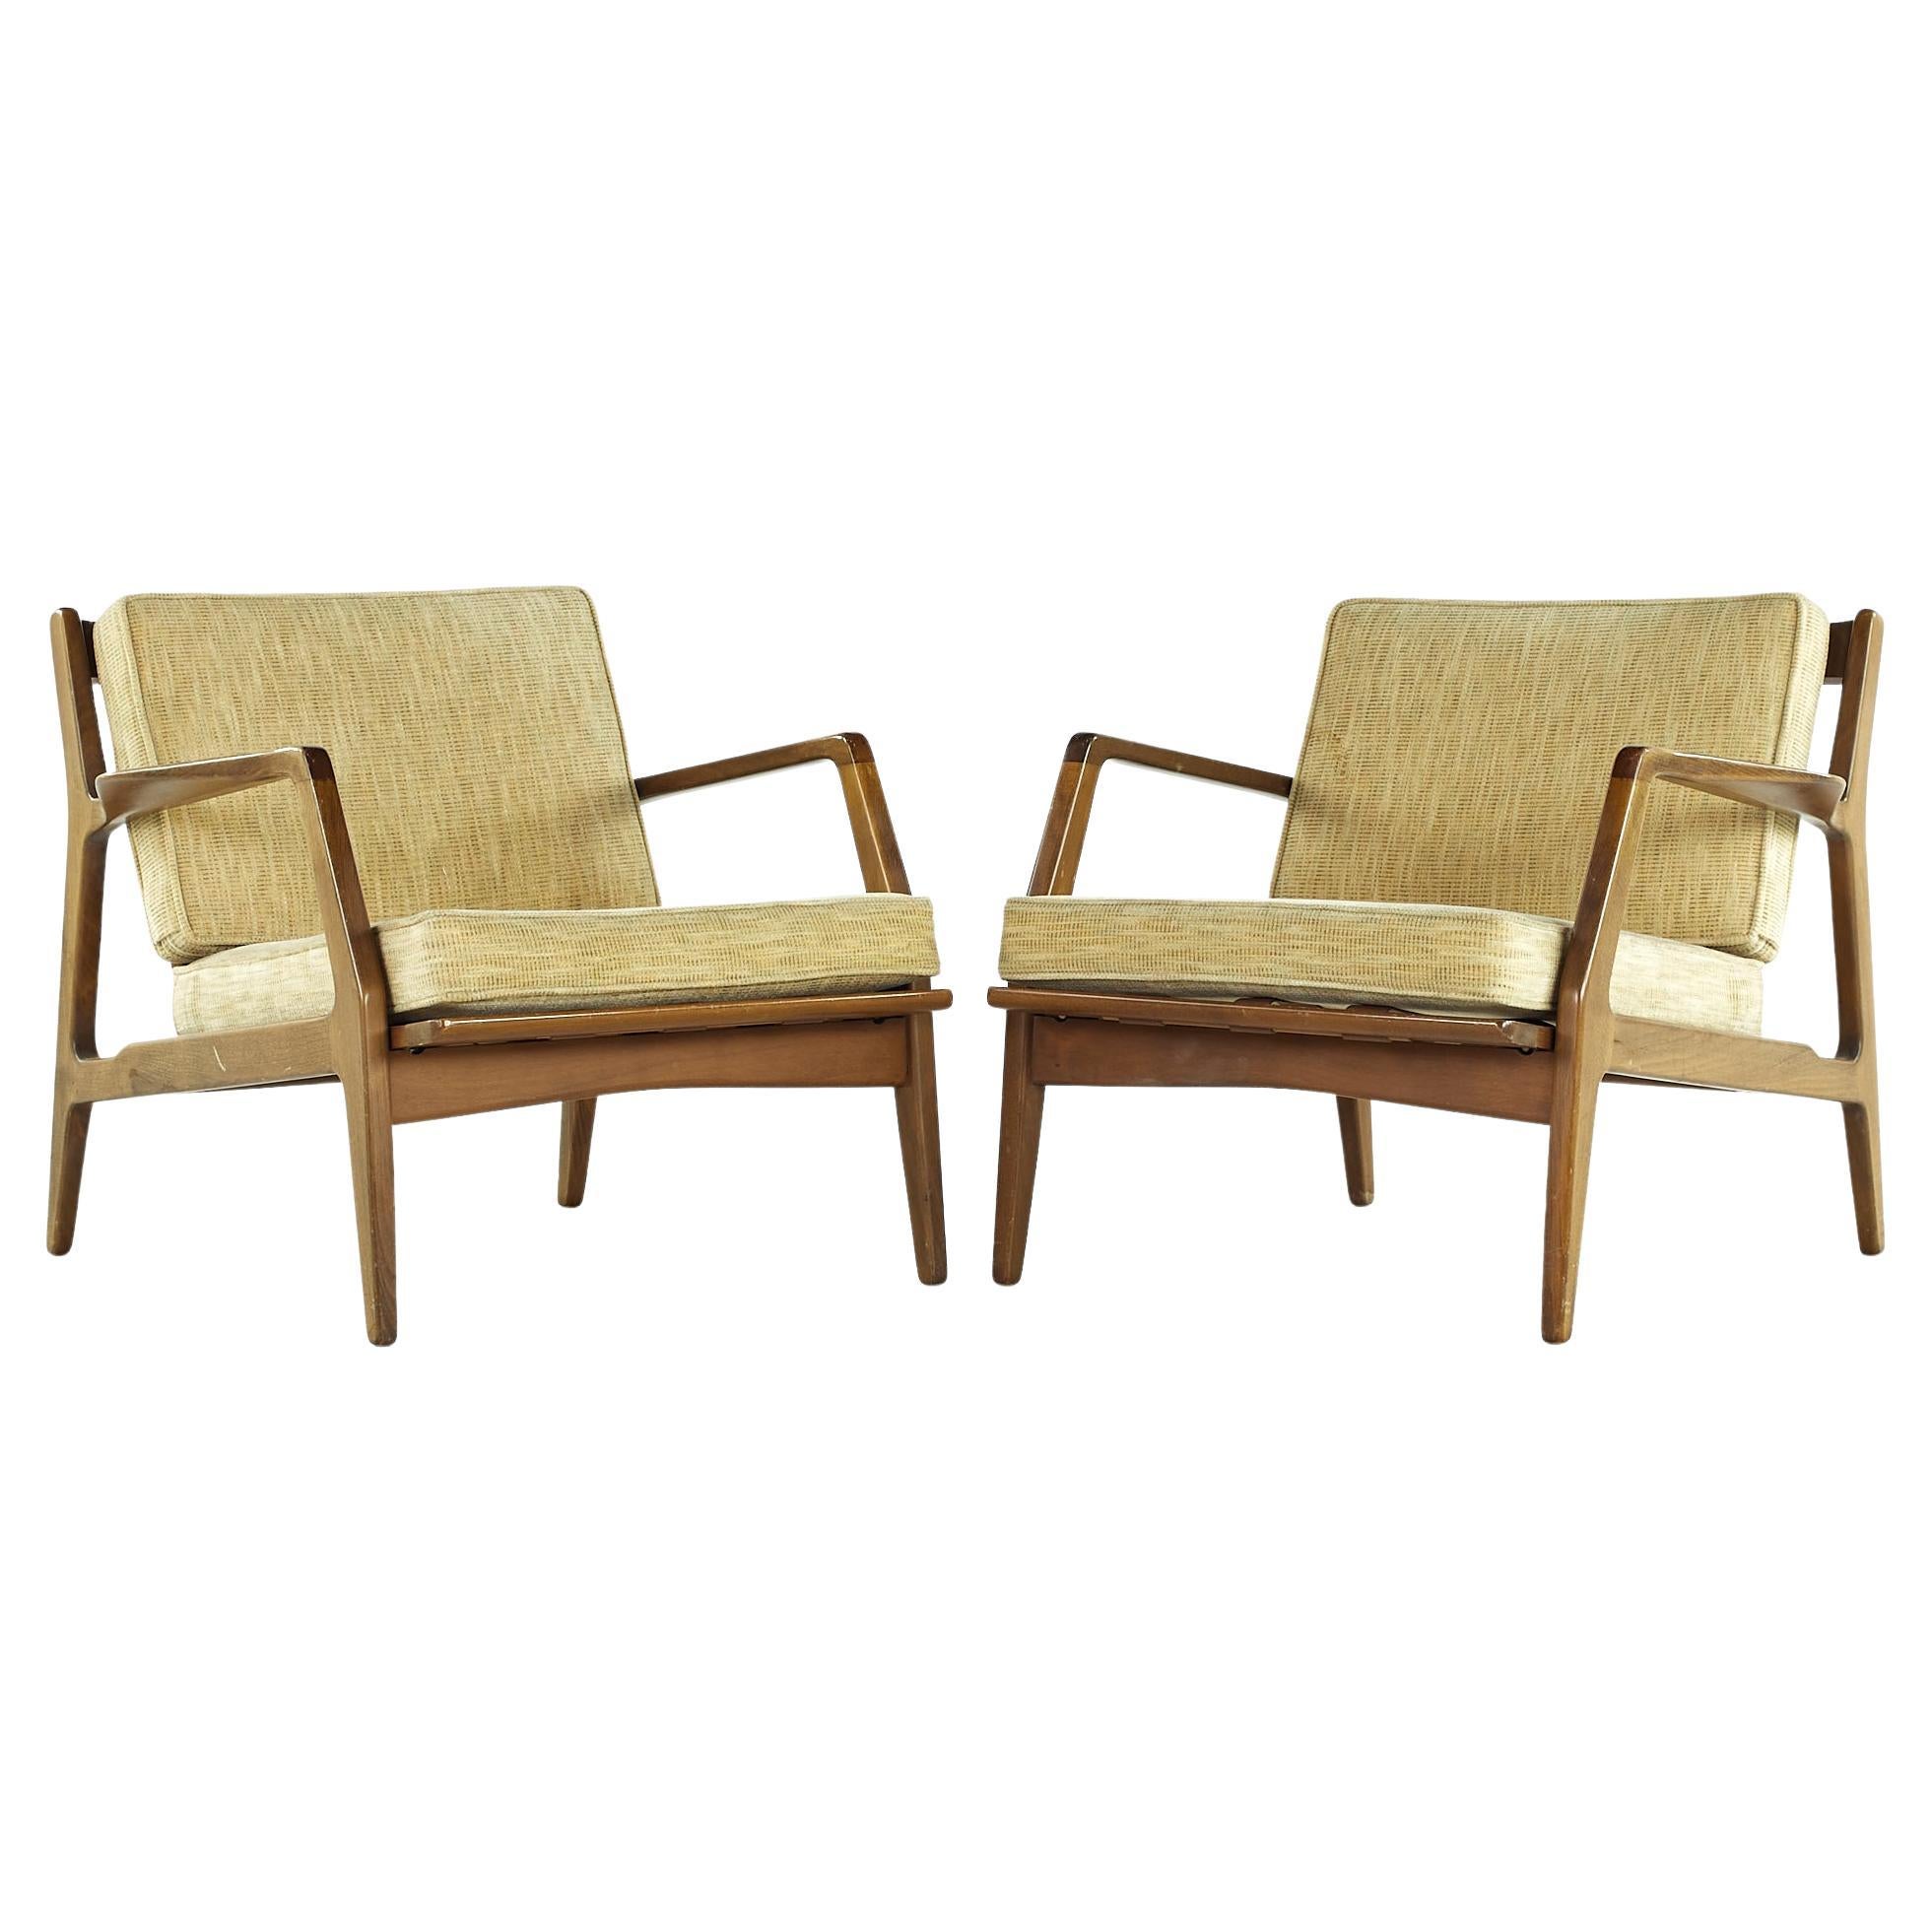 Lawrence Peabody Midcentury Walnut Lounge Chairs, Pair